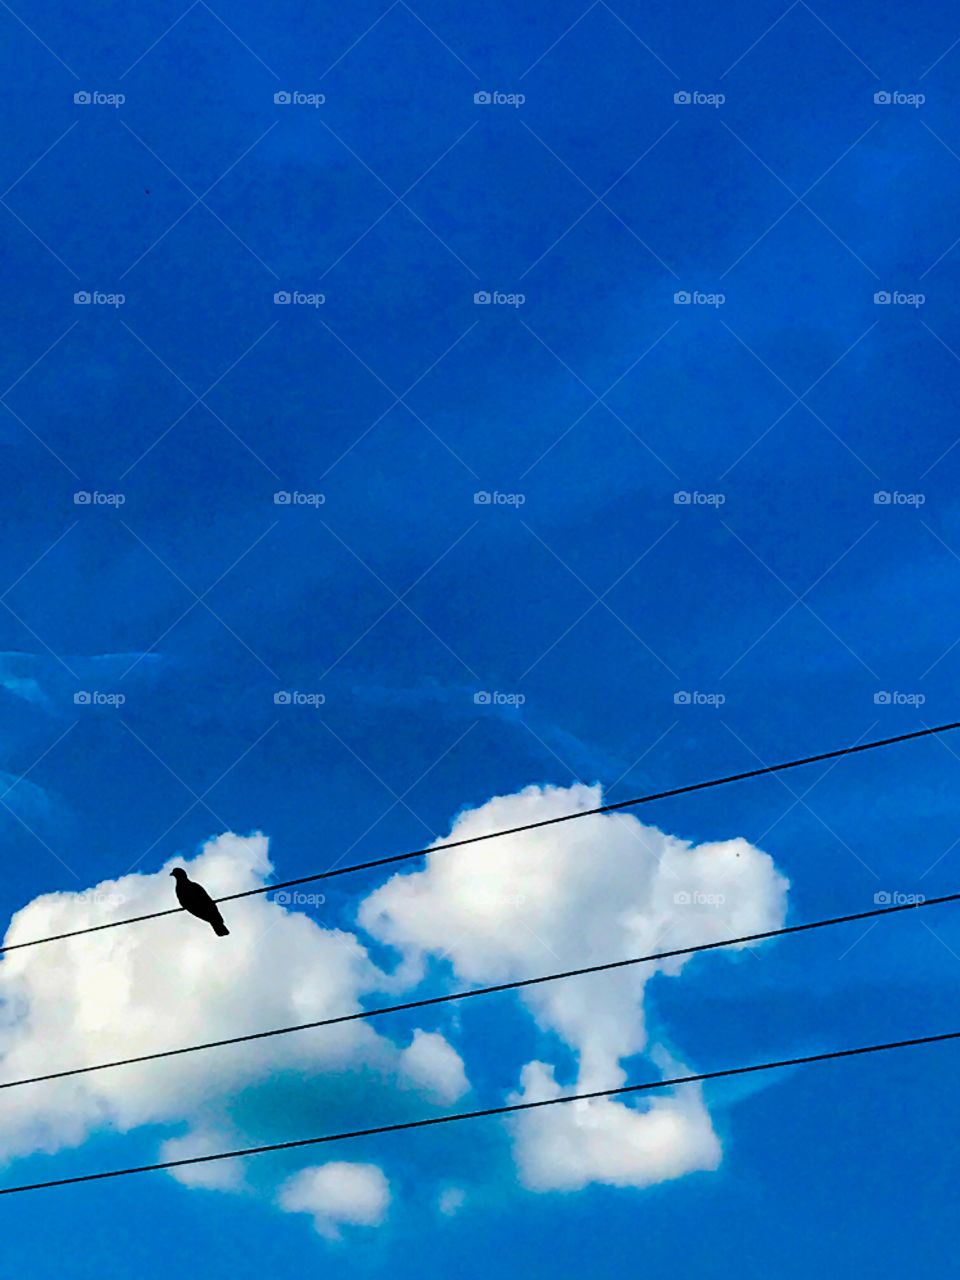 Silhouette of bird on wire 